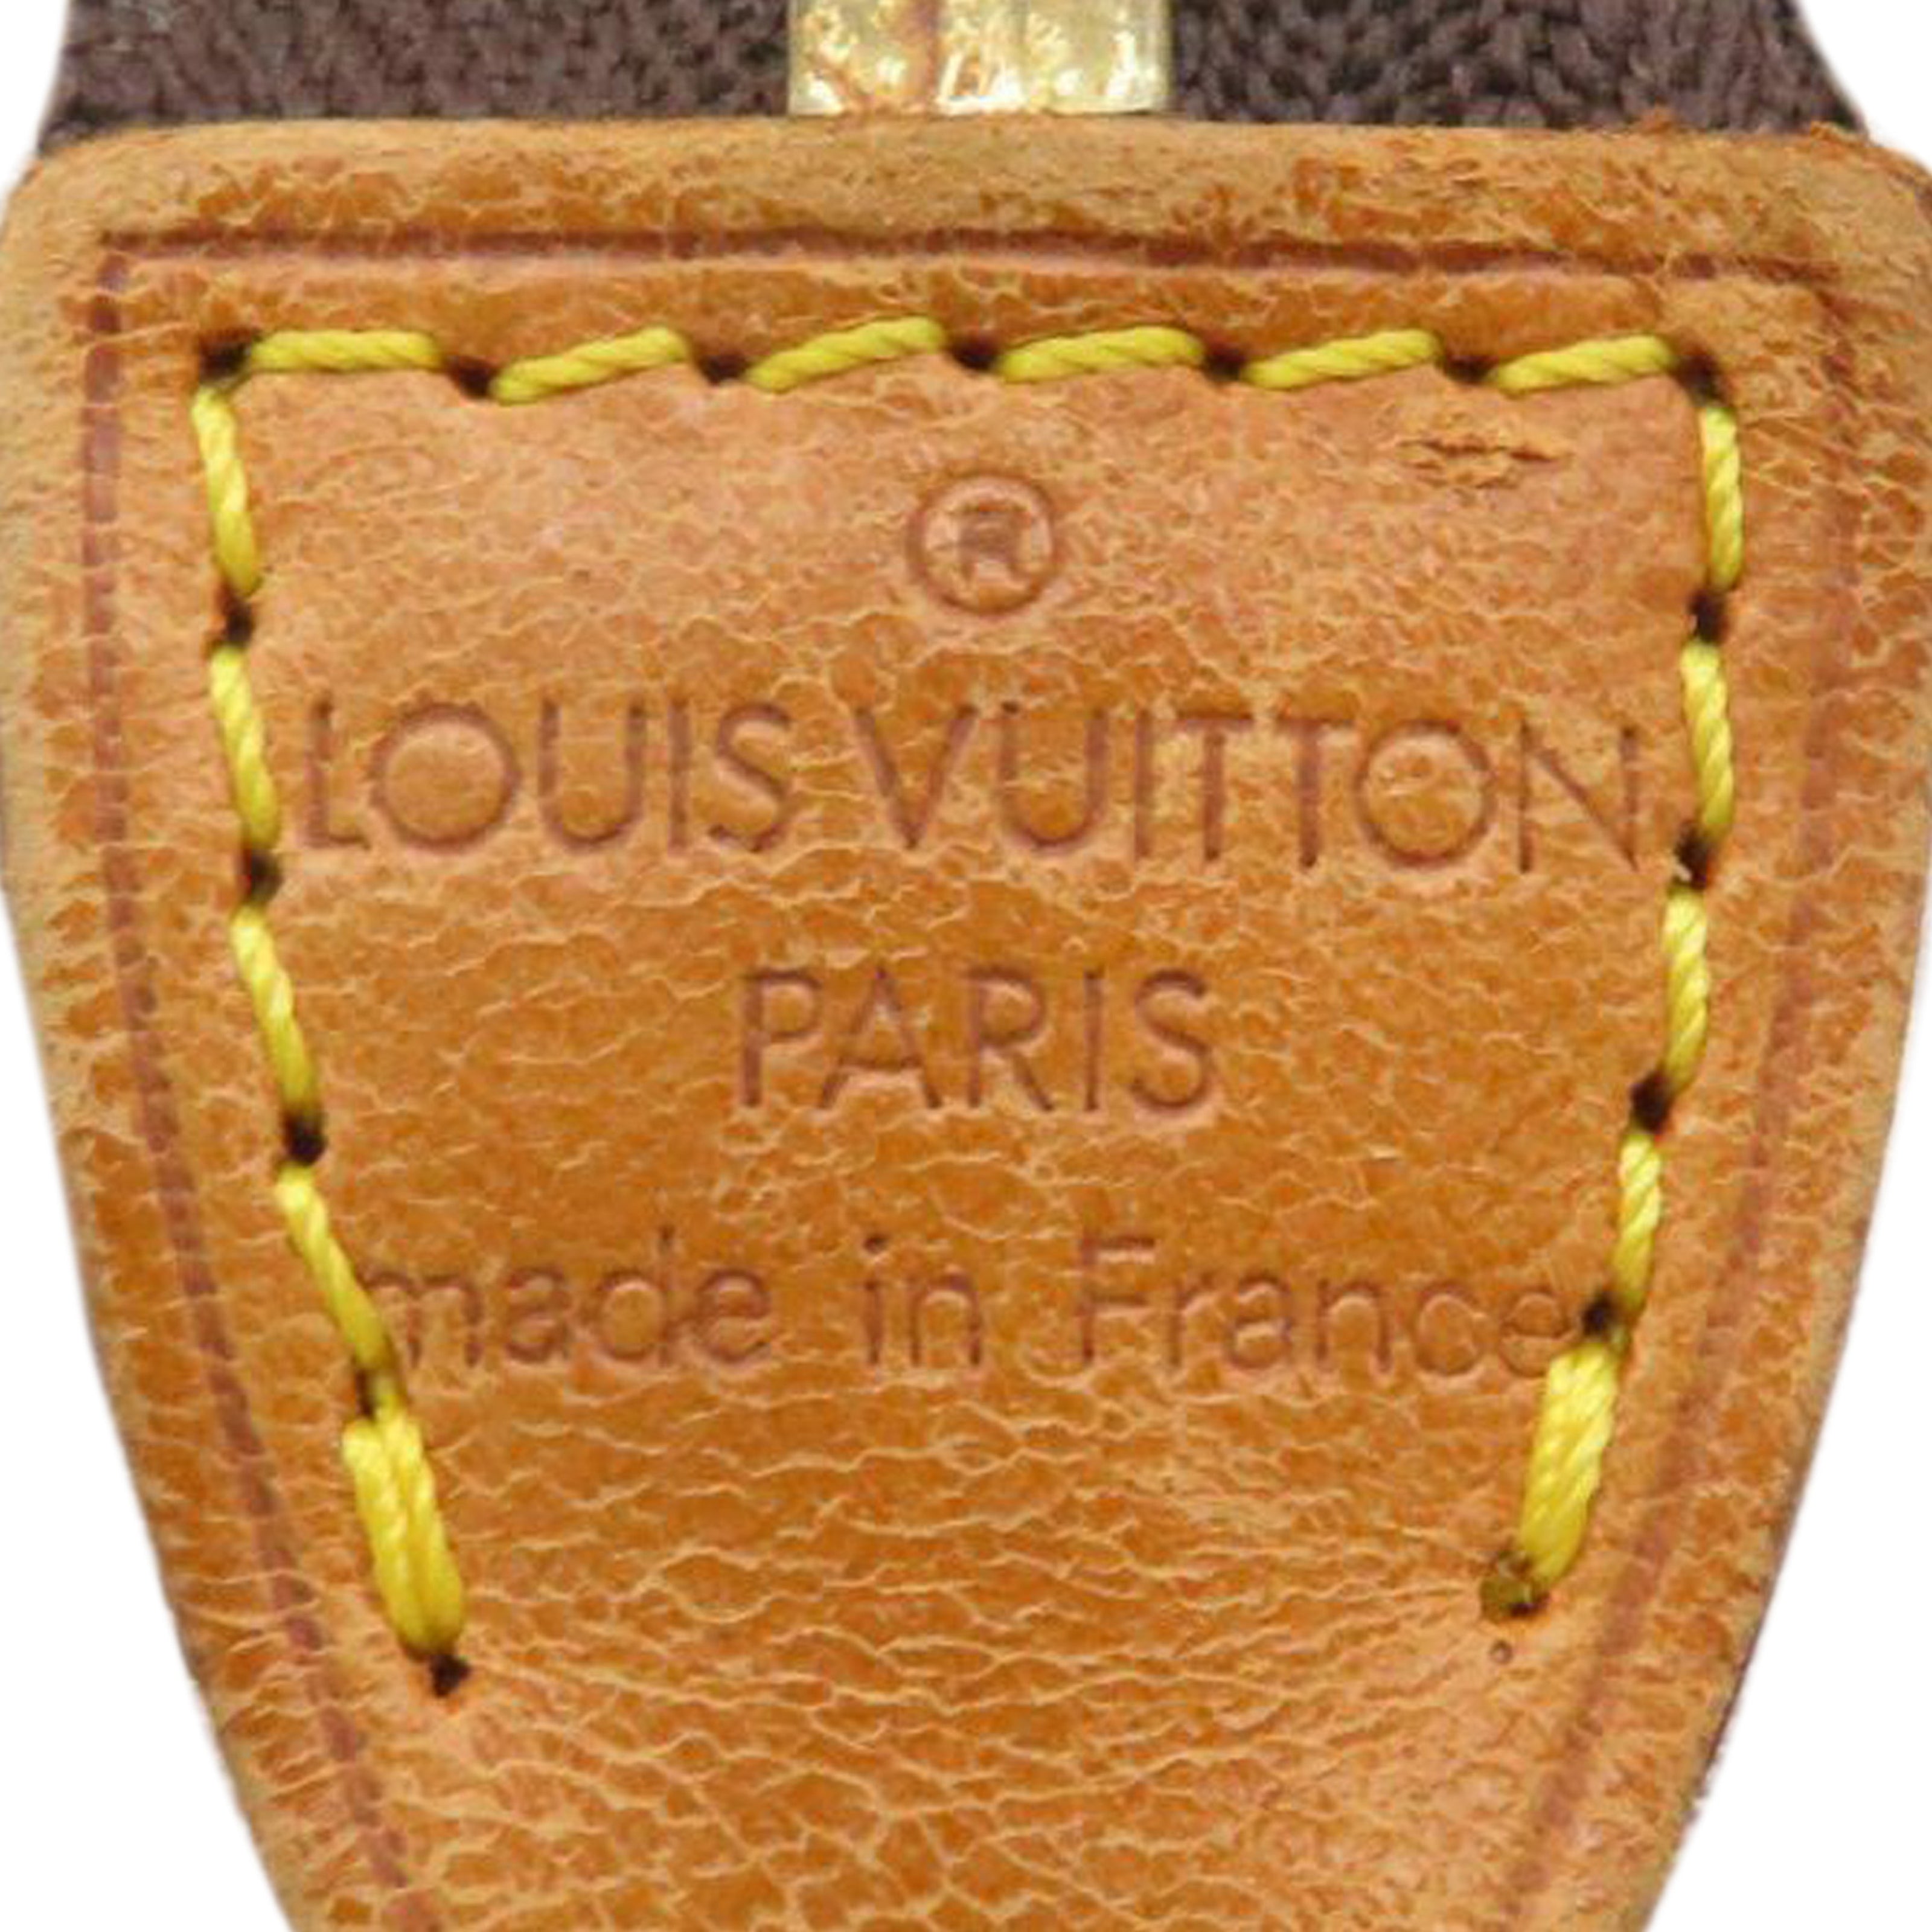 Louis Vuitton Limited Edition Monogram Graffiti by Stephen Sprouse, Lot  #58824